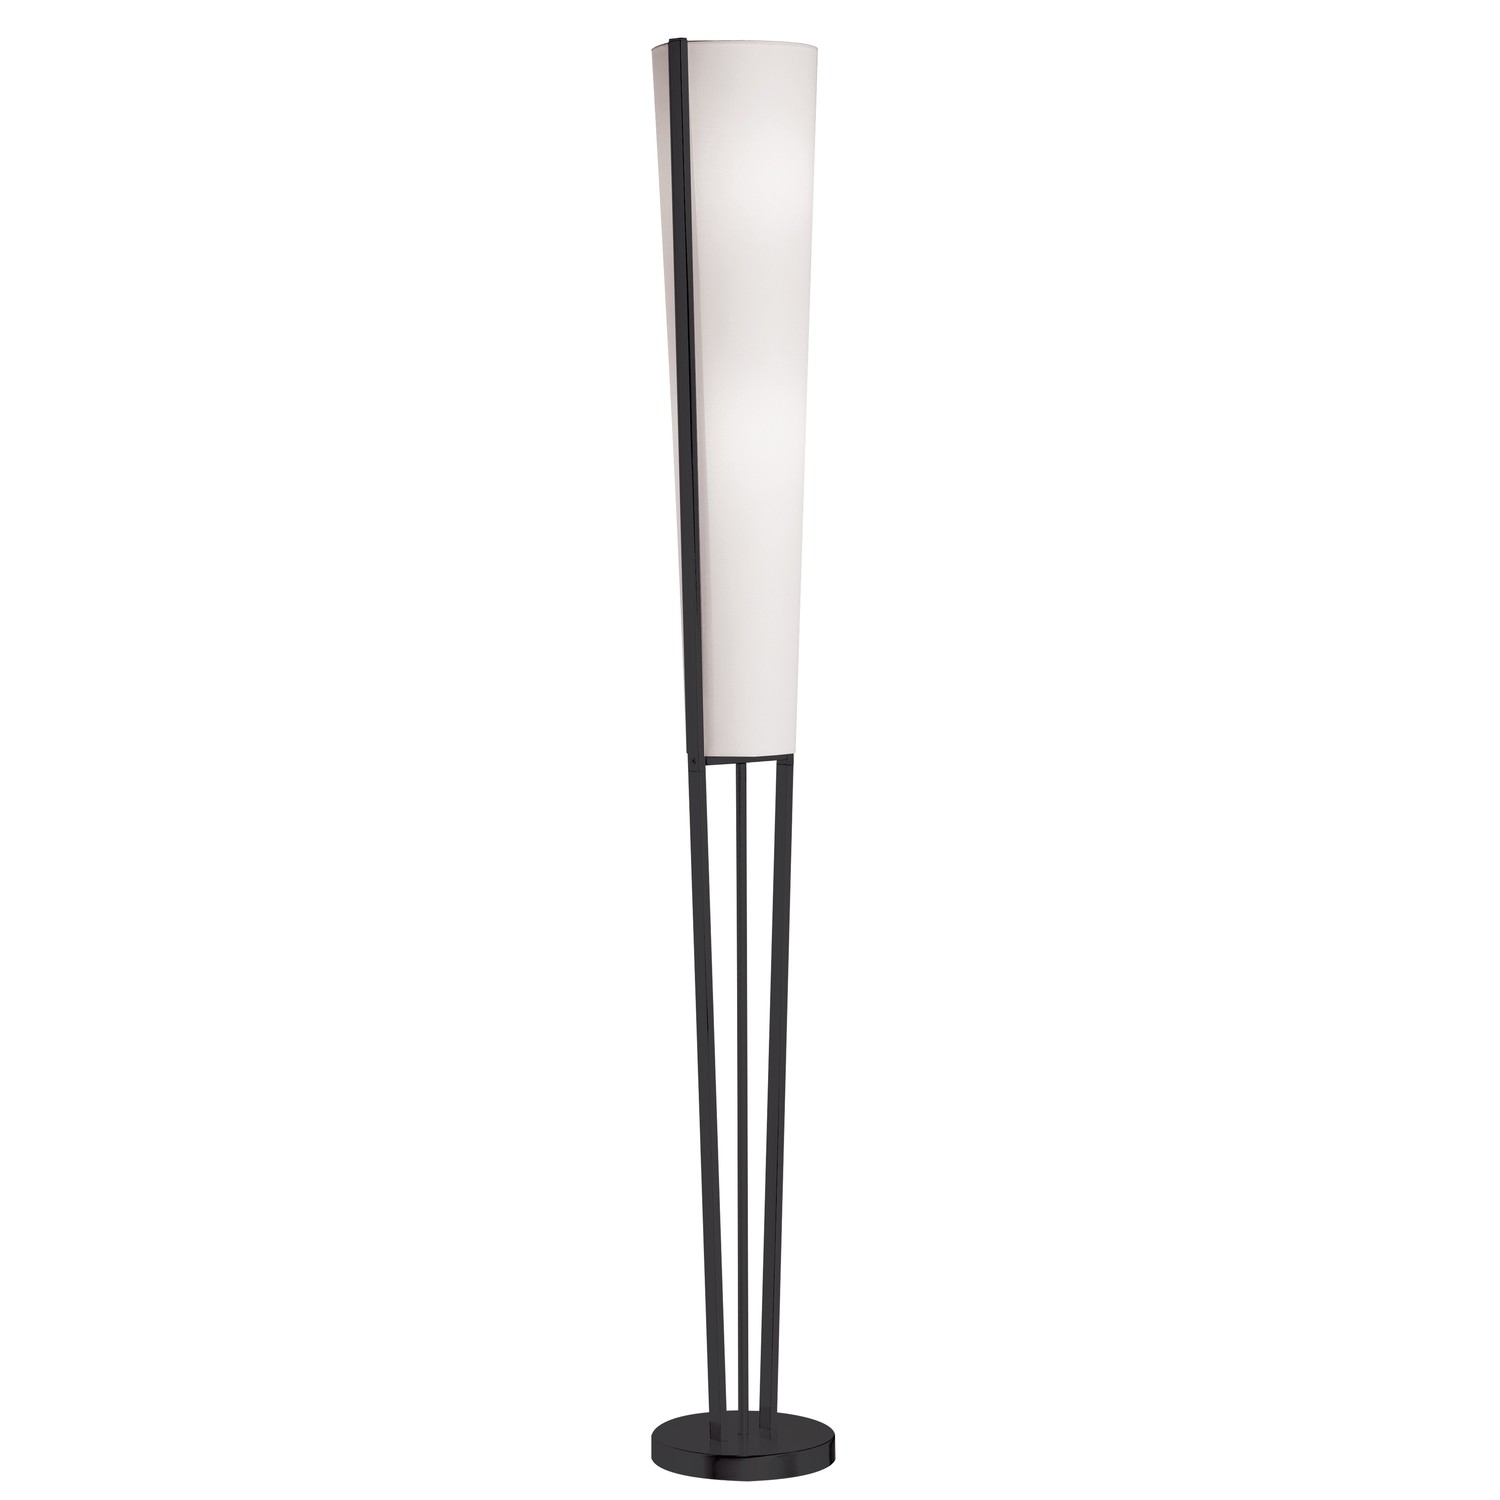 2 Light Incandescent Floor Lamp, Matte Black with White Shade